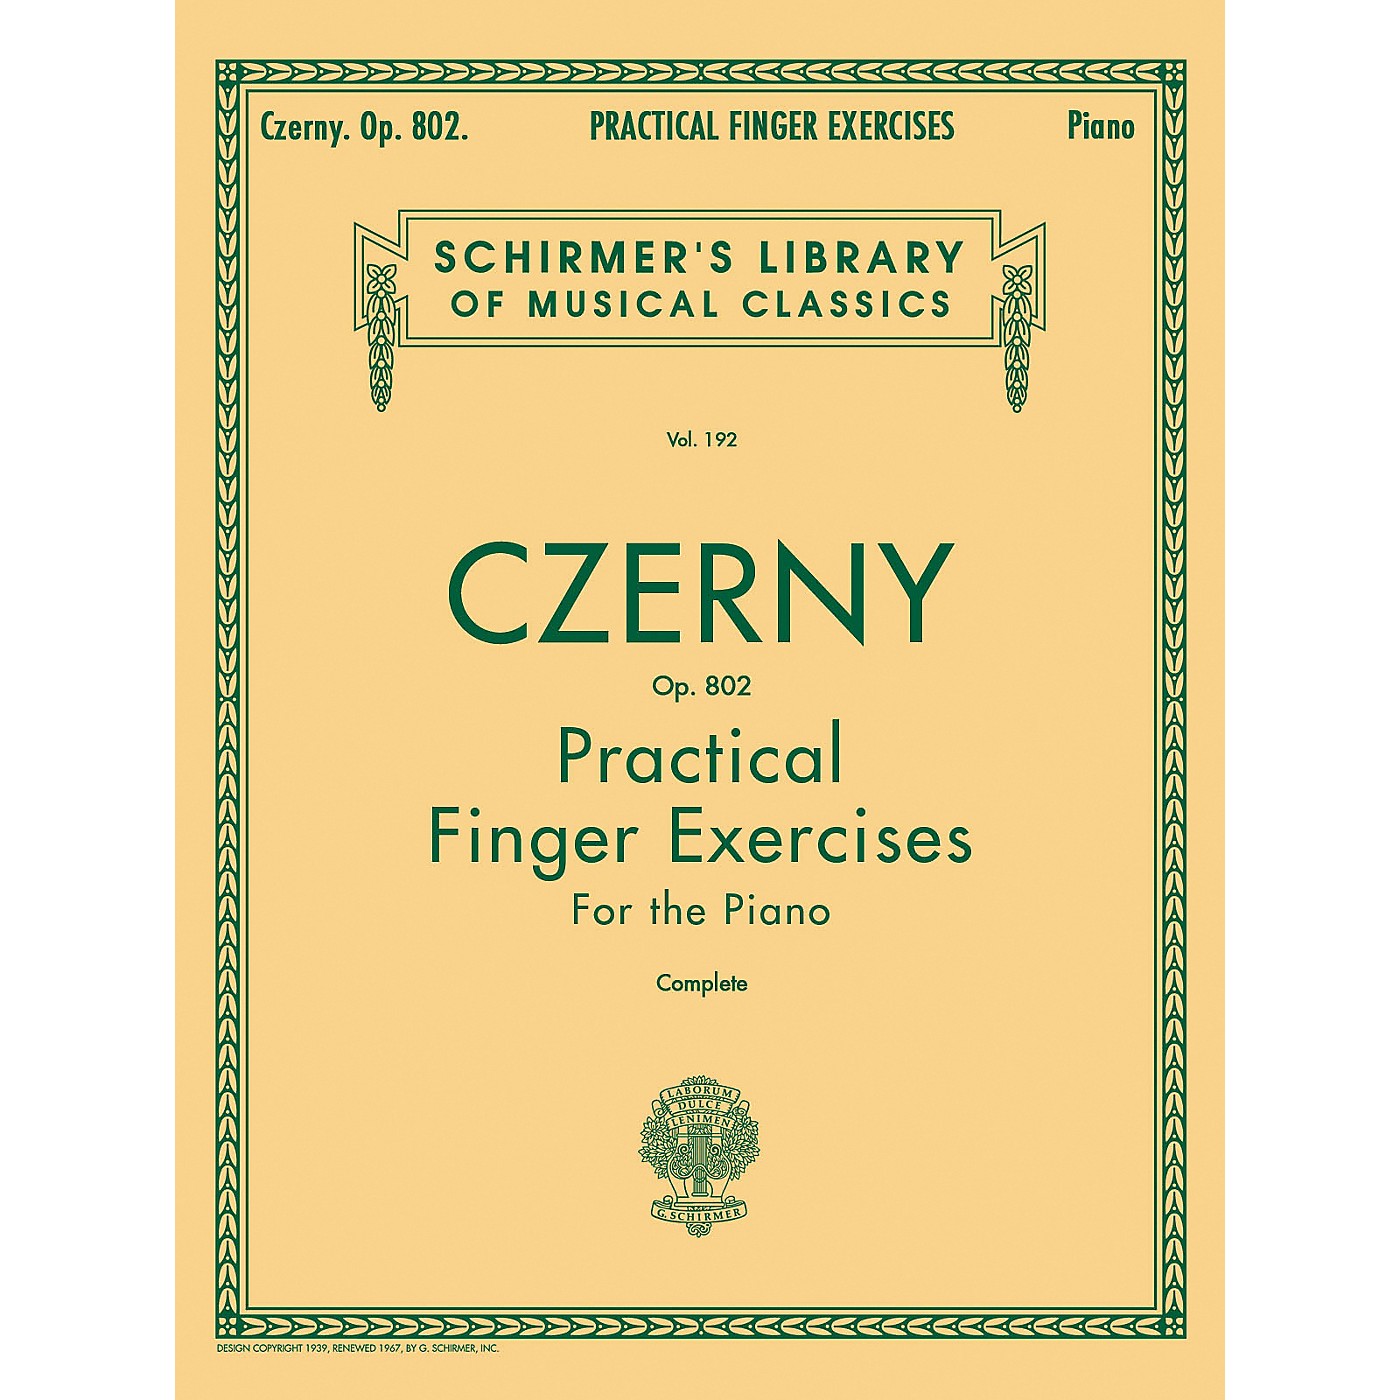 G. Schirmer Practical Finger Exercises Piano Op 802 Complete By Czerny thumbnail